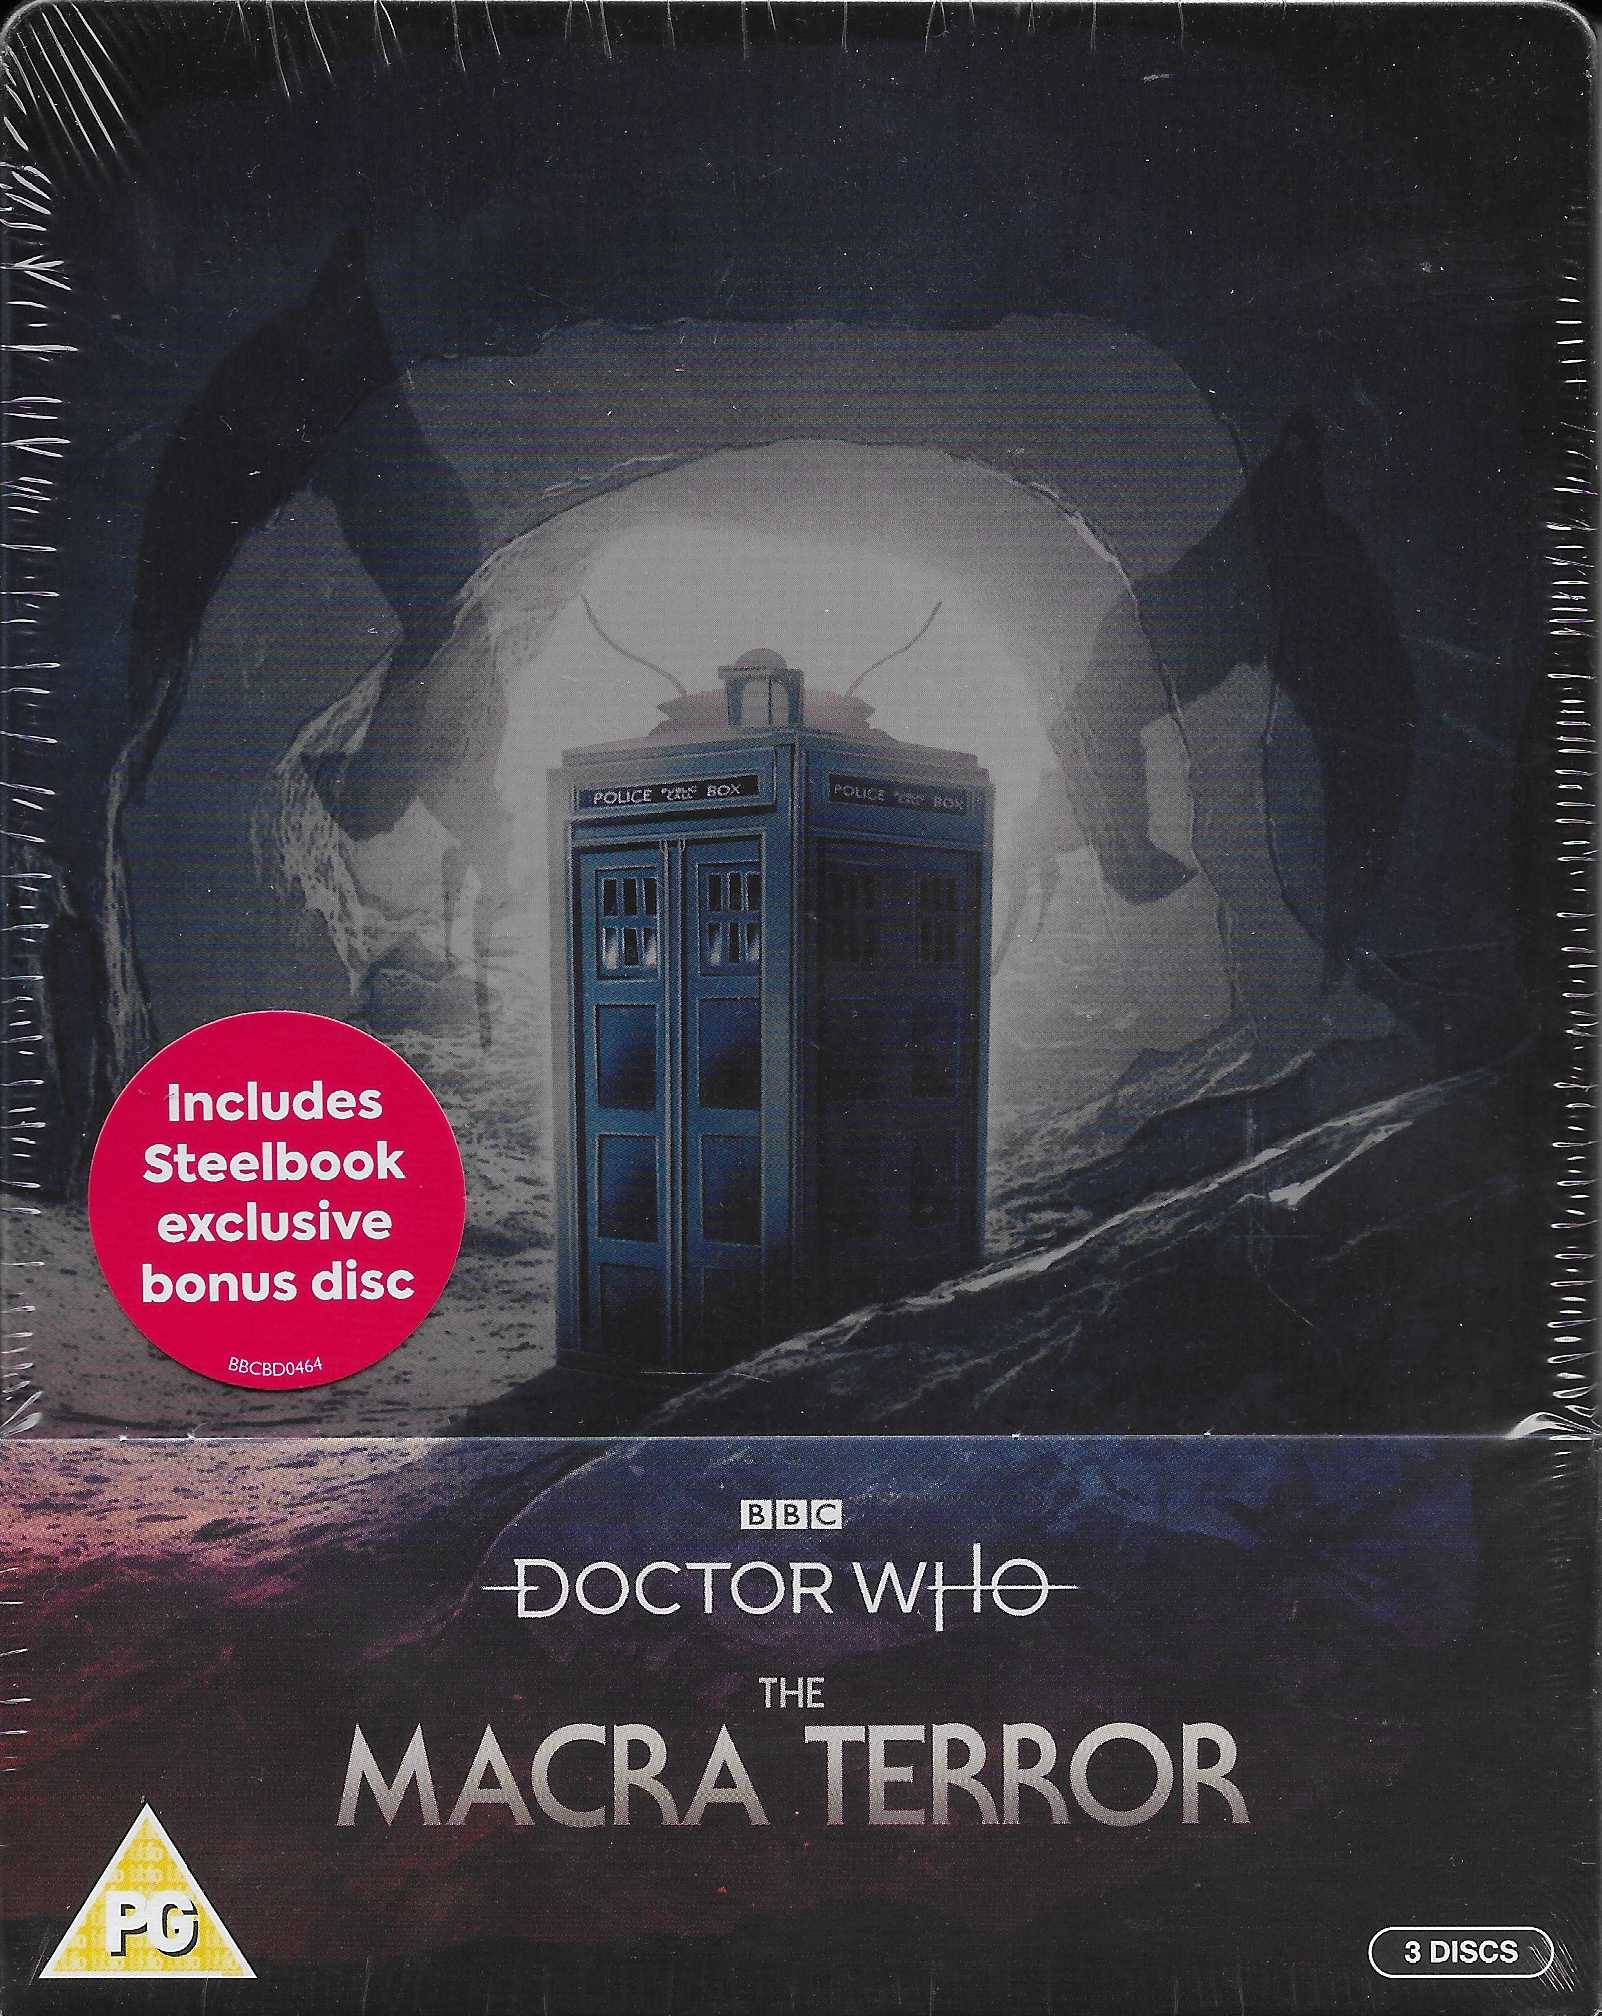 Picture of BBCBD 0464 Doctor Who - The Macra terror by artist Ian Stuart Black from the BBC blu-rays - Records and Tapes library